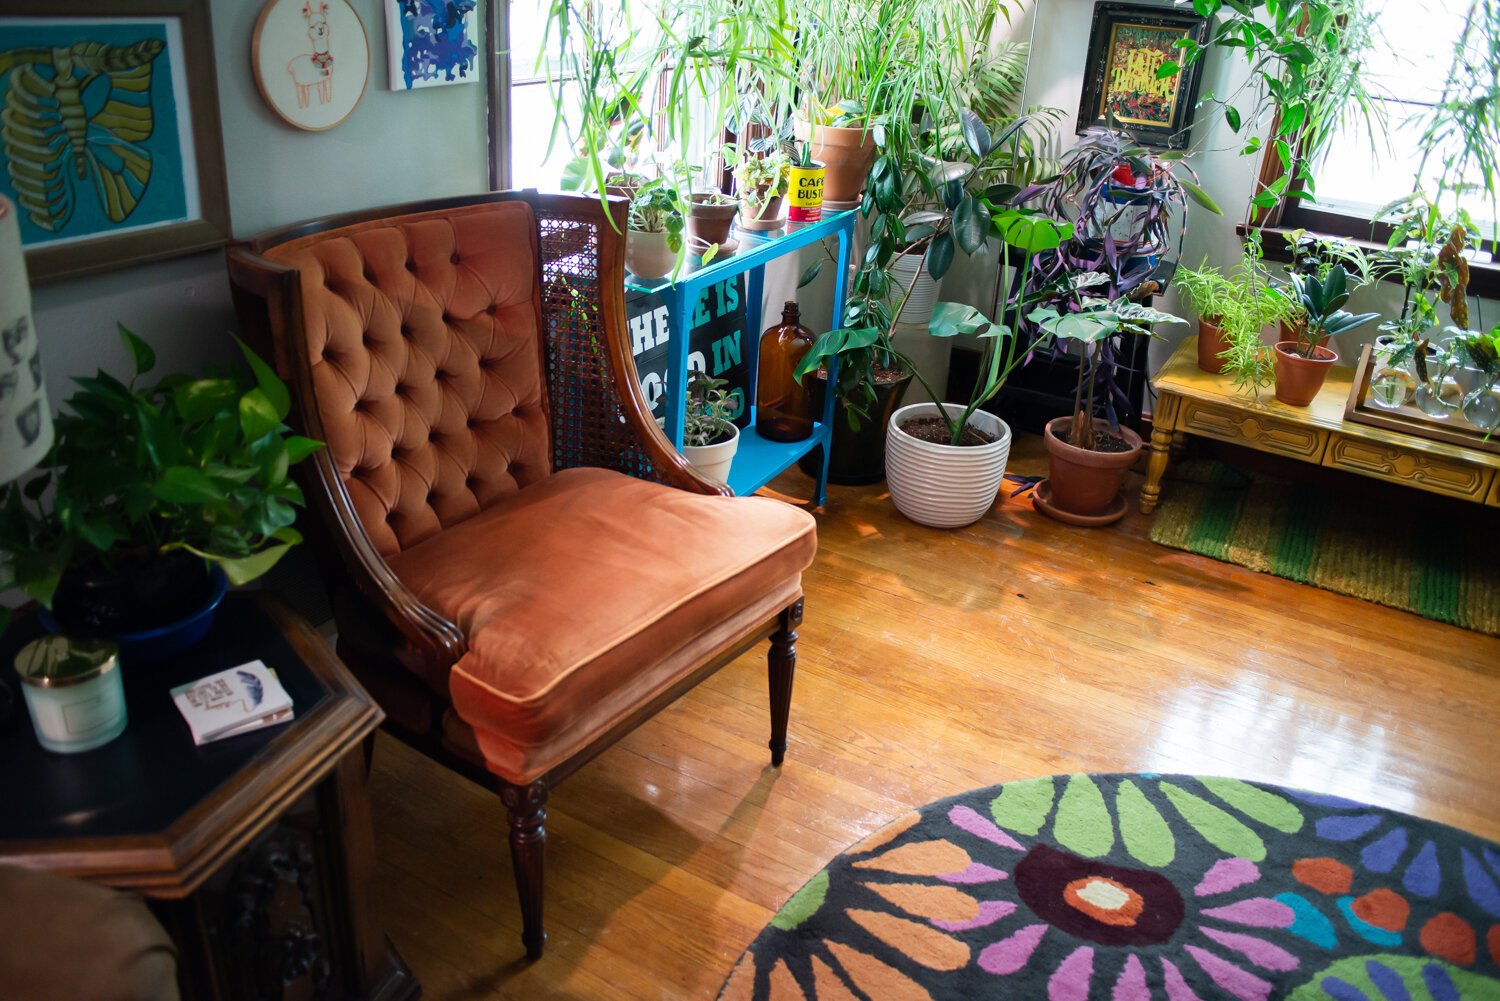 An orange chair from their friends/landlords is a feature in their living room.